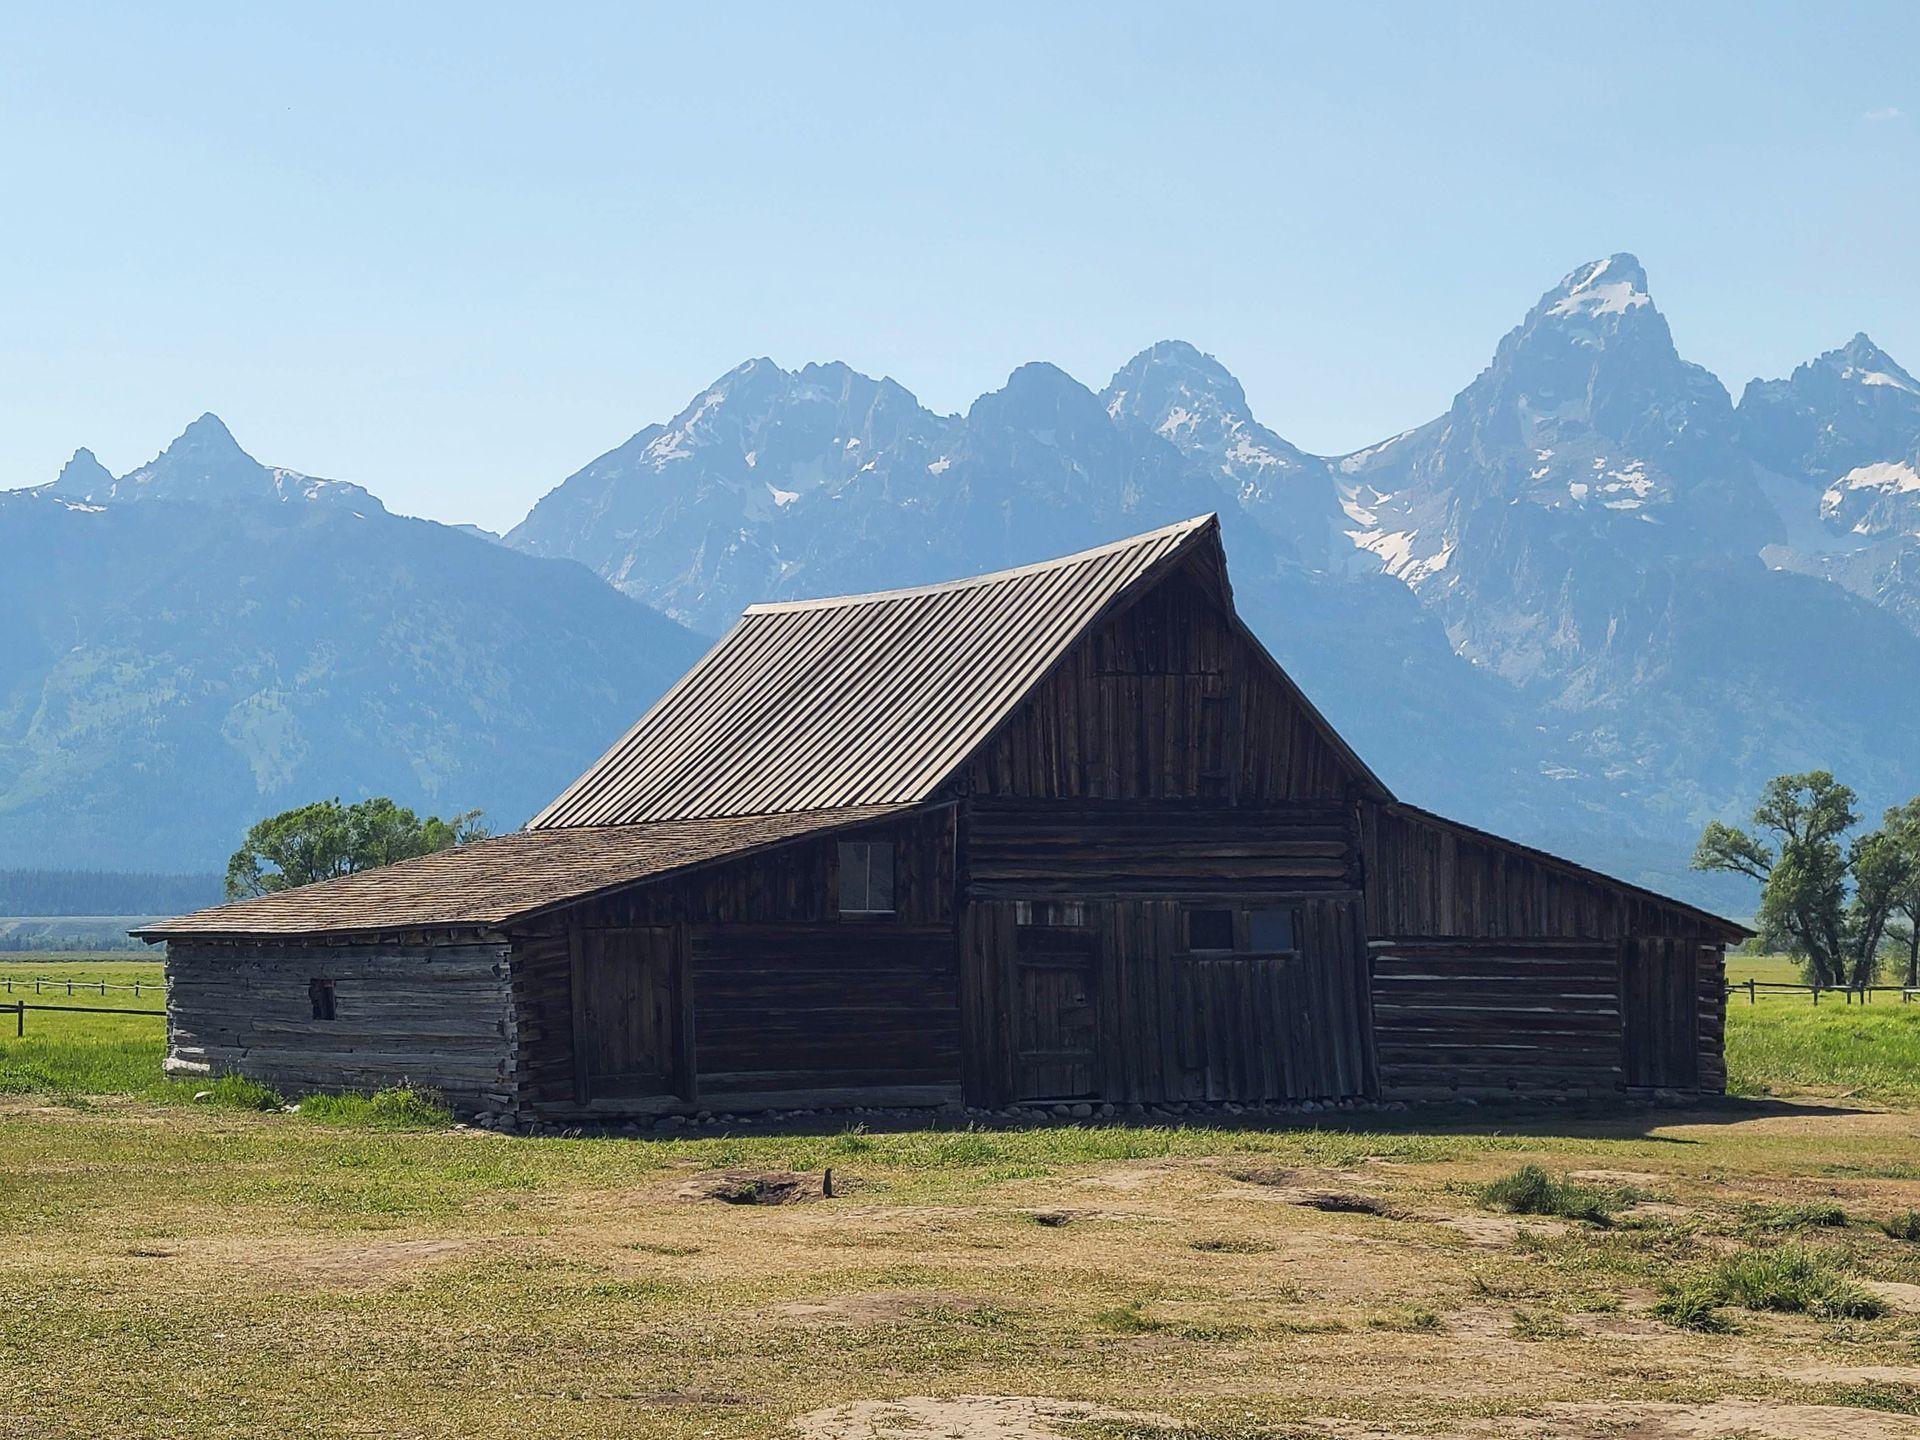 A log cabin with a pointed roof with mountains in the background.